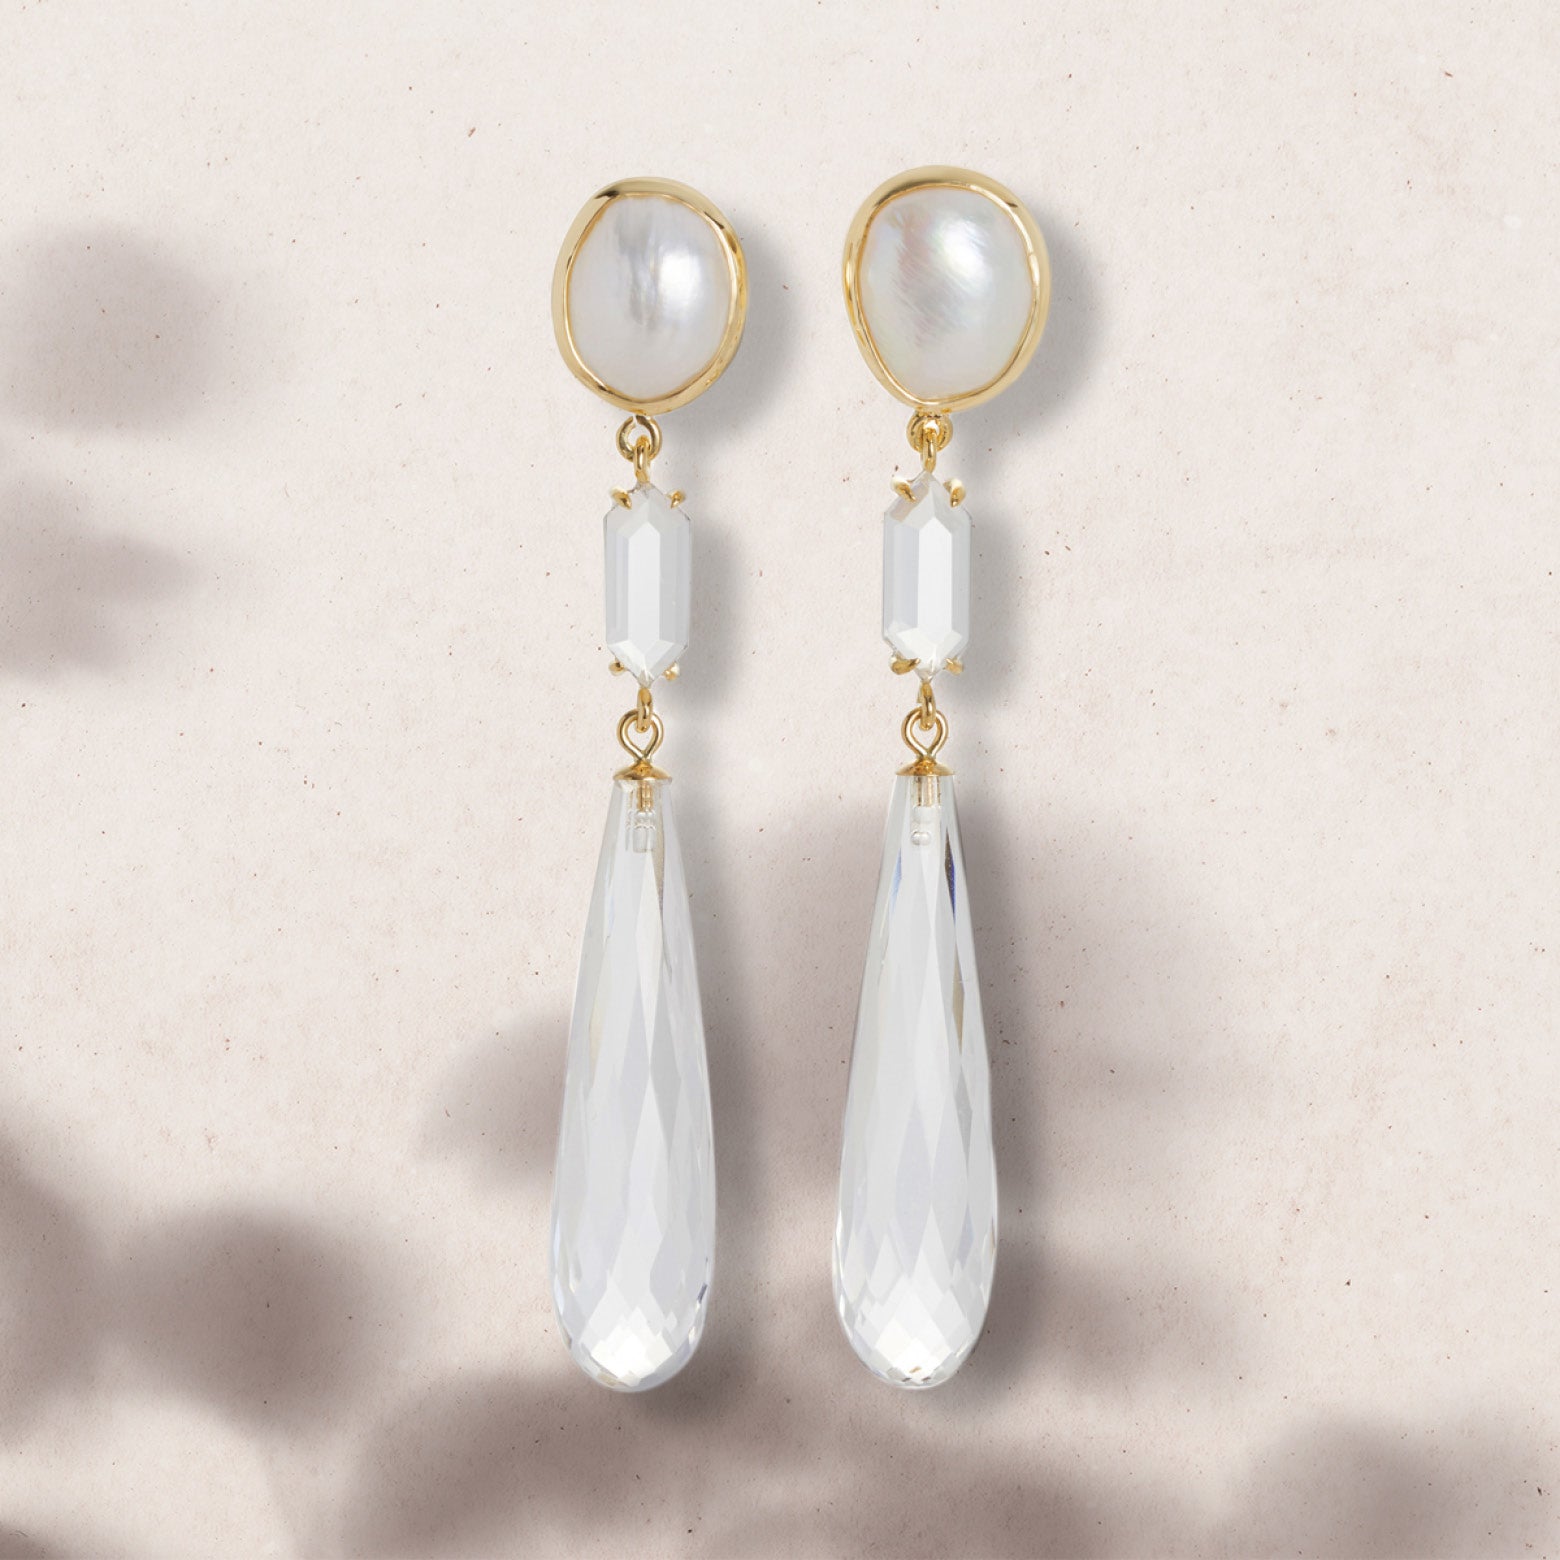 Flat lay of drop earrings with pearl and faceted clear quartz set in yellow gold